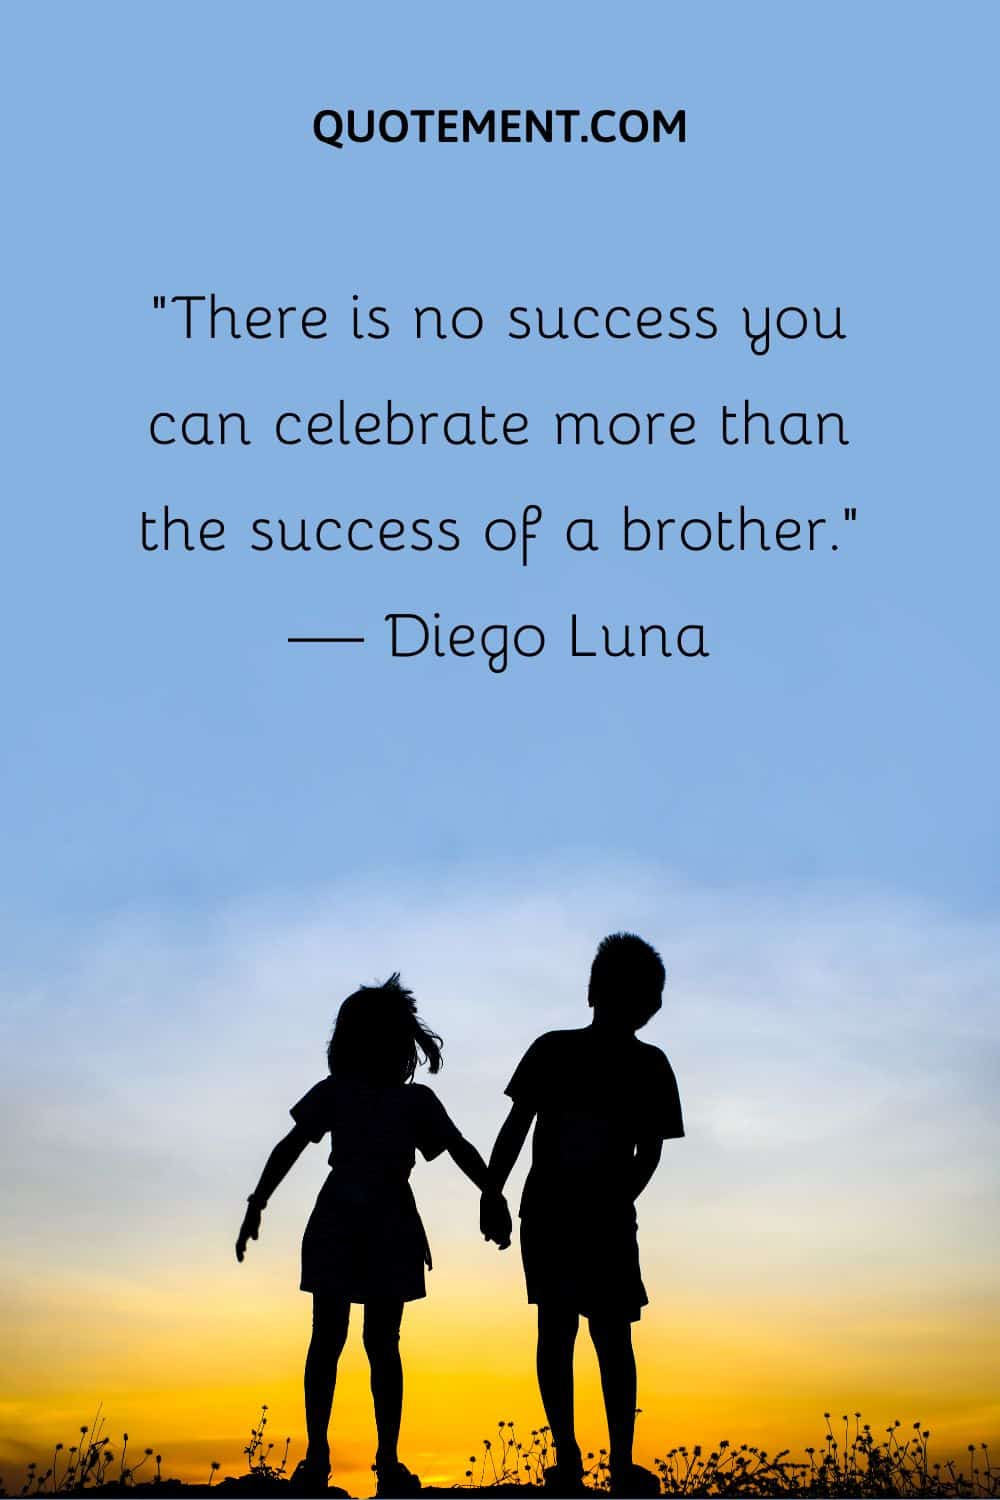 “There is no success you can celebrate more than the success of a brother.” — Diego Luna